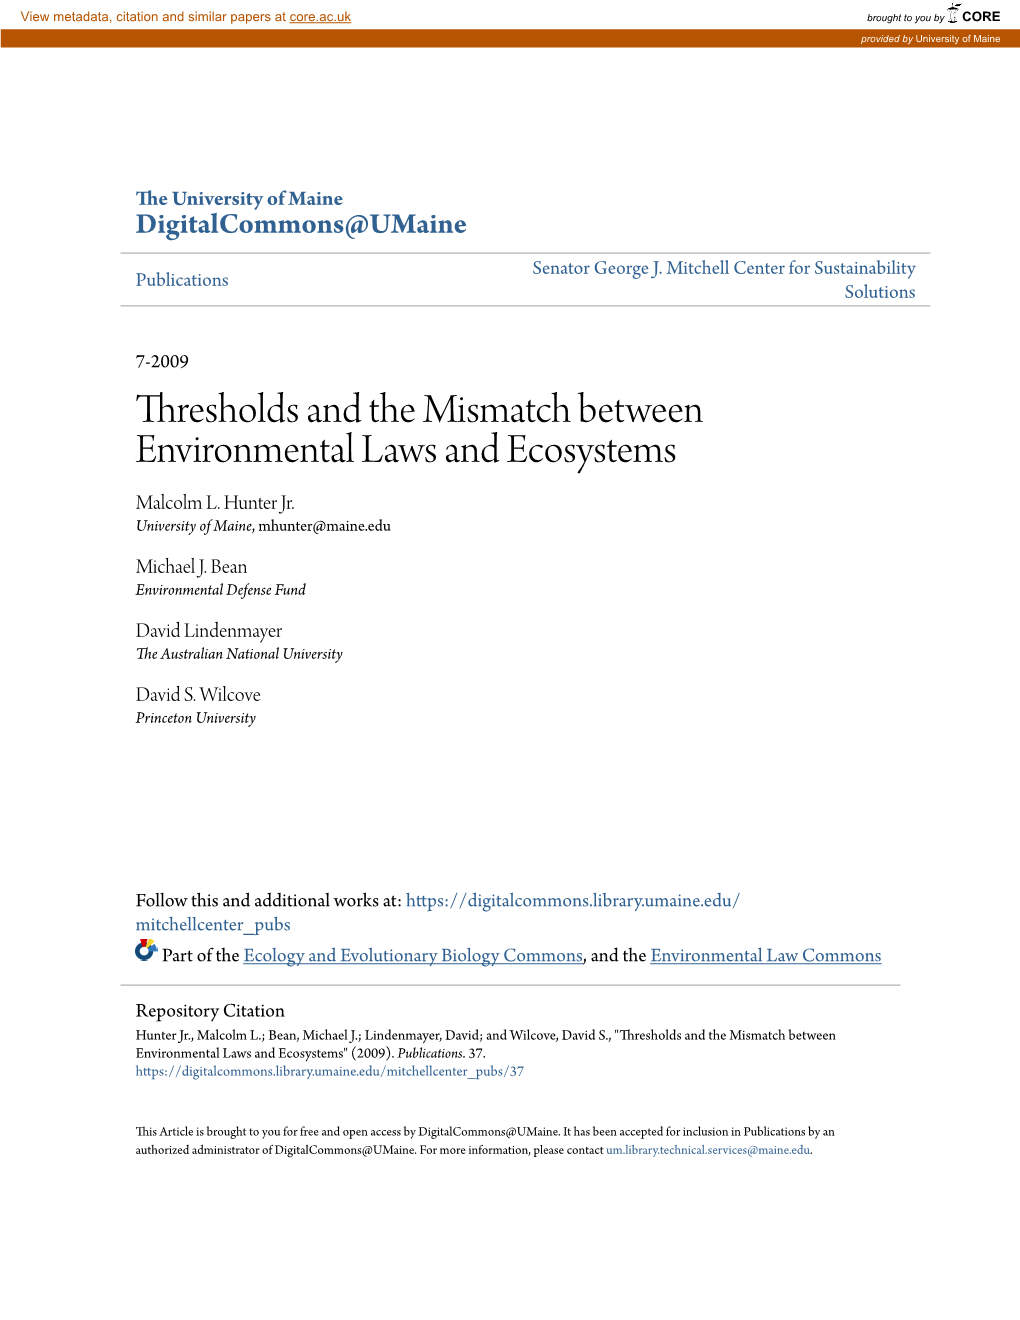 Thresholds and the Mismatch Between Environmental Laws and Ecosystems Malcolm L